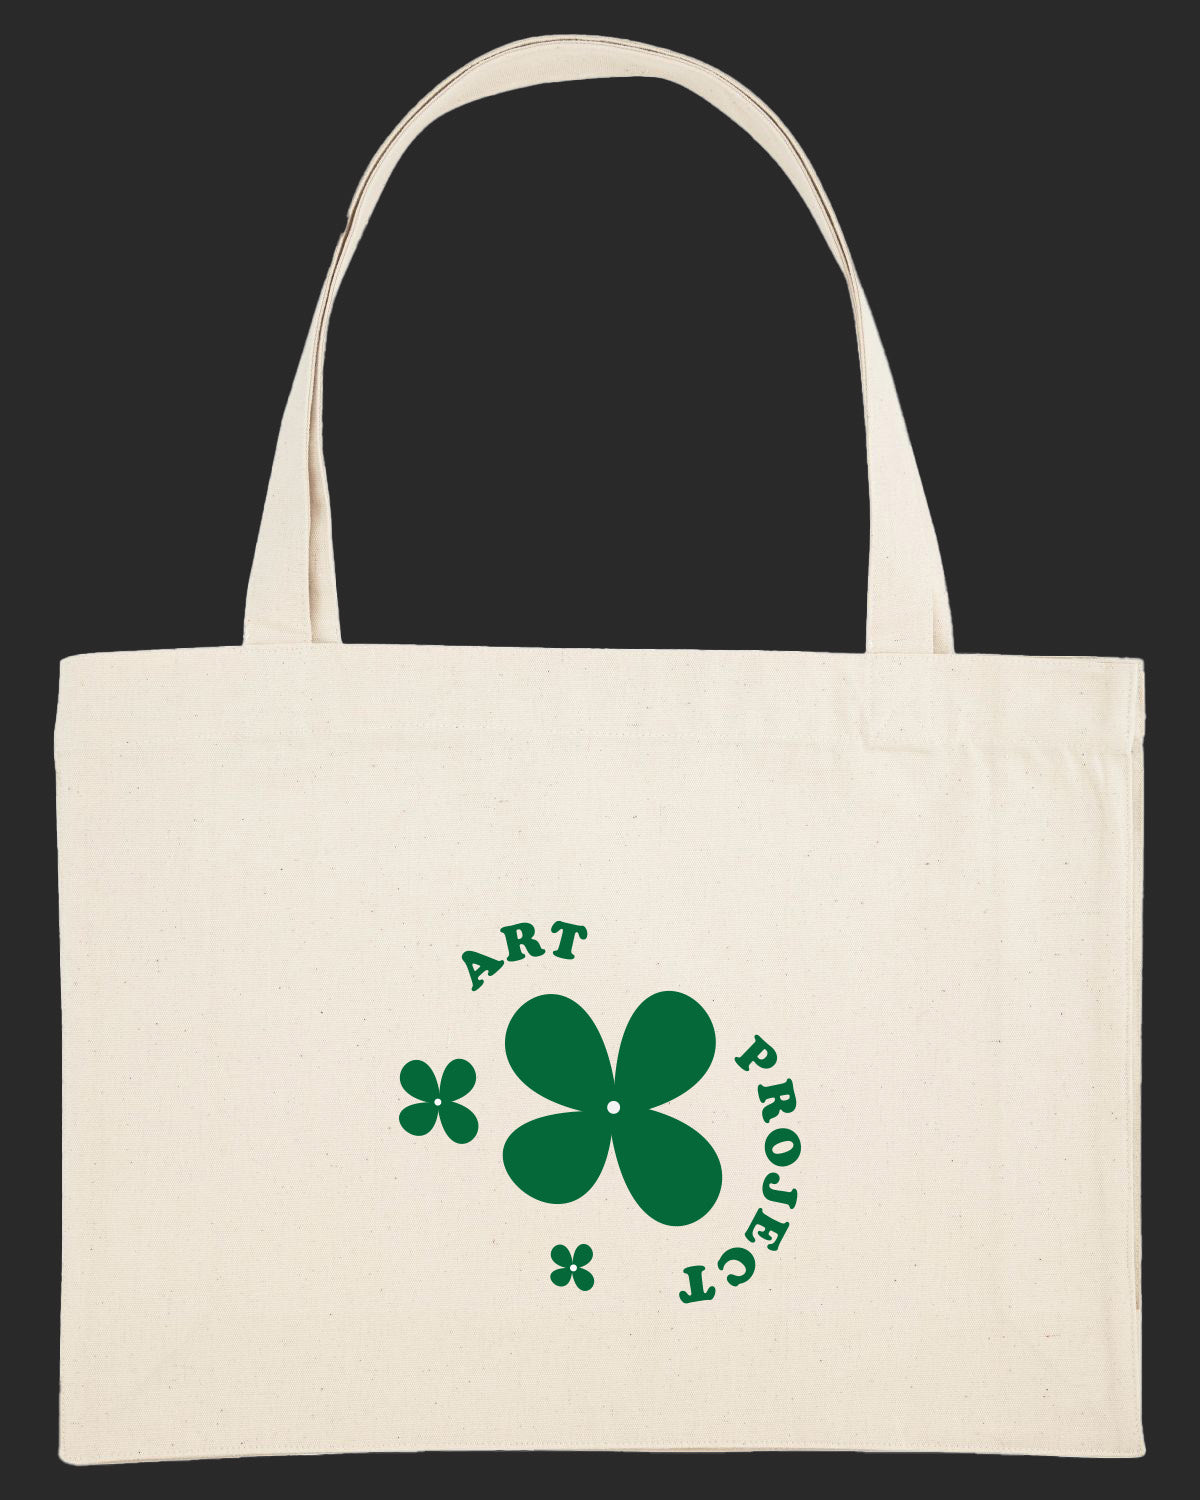 customize your own sustainable shopping bag made of 80% recycled organic cotton.